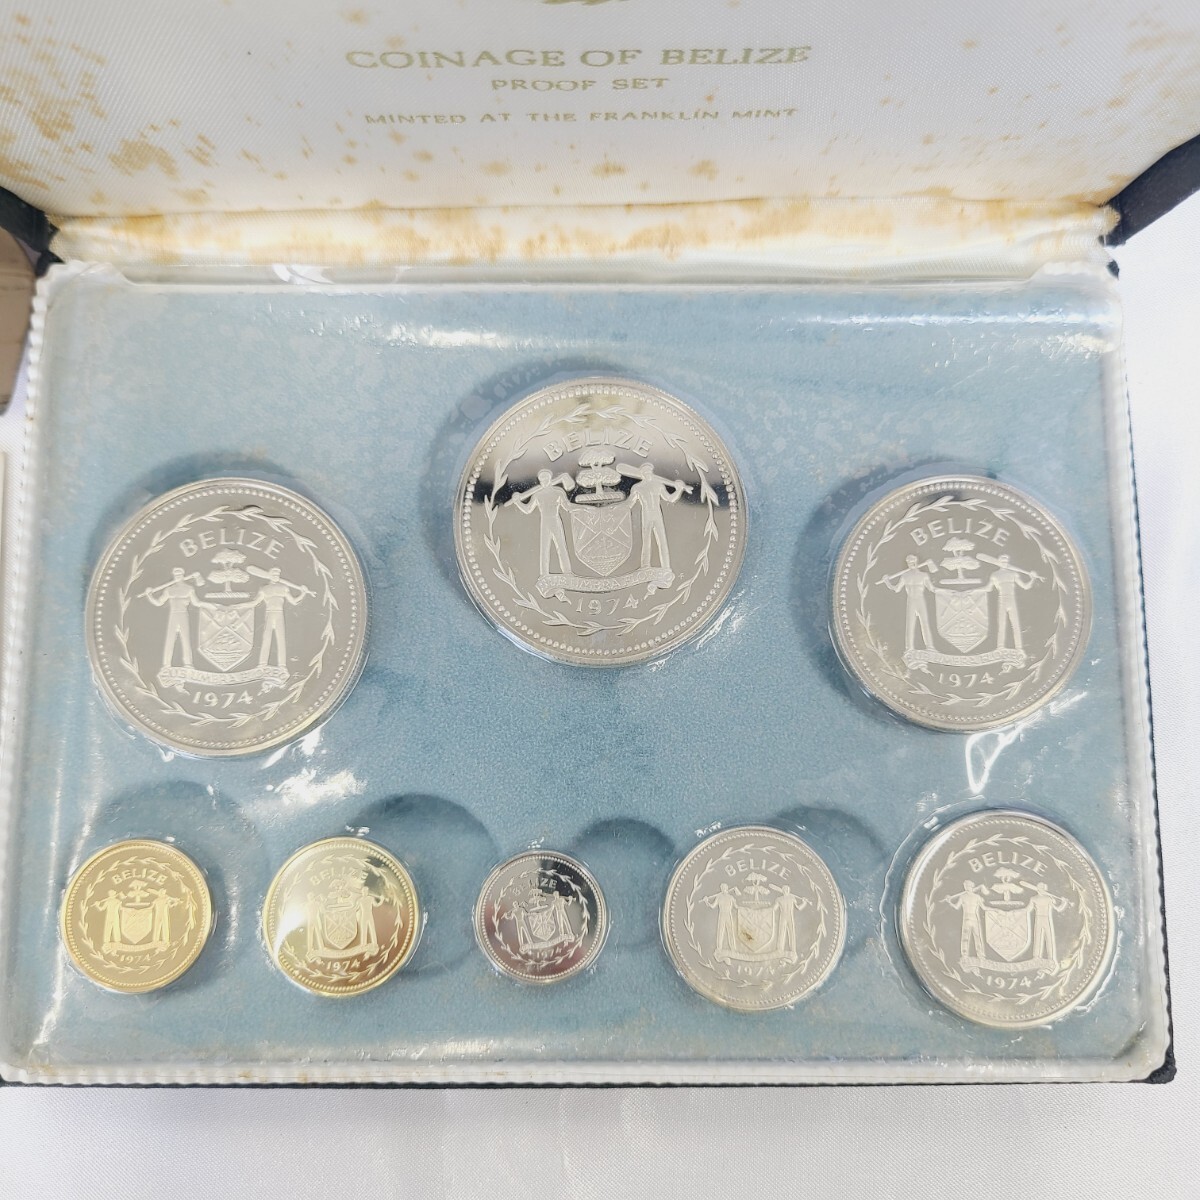 ② 1974 year Berry ze country new money proof set Frank Lynn * mint coin money silver coin coin foreign abroad Vintage Belize